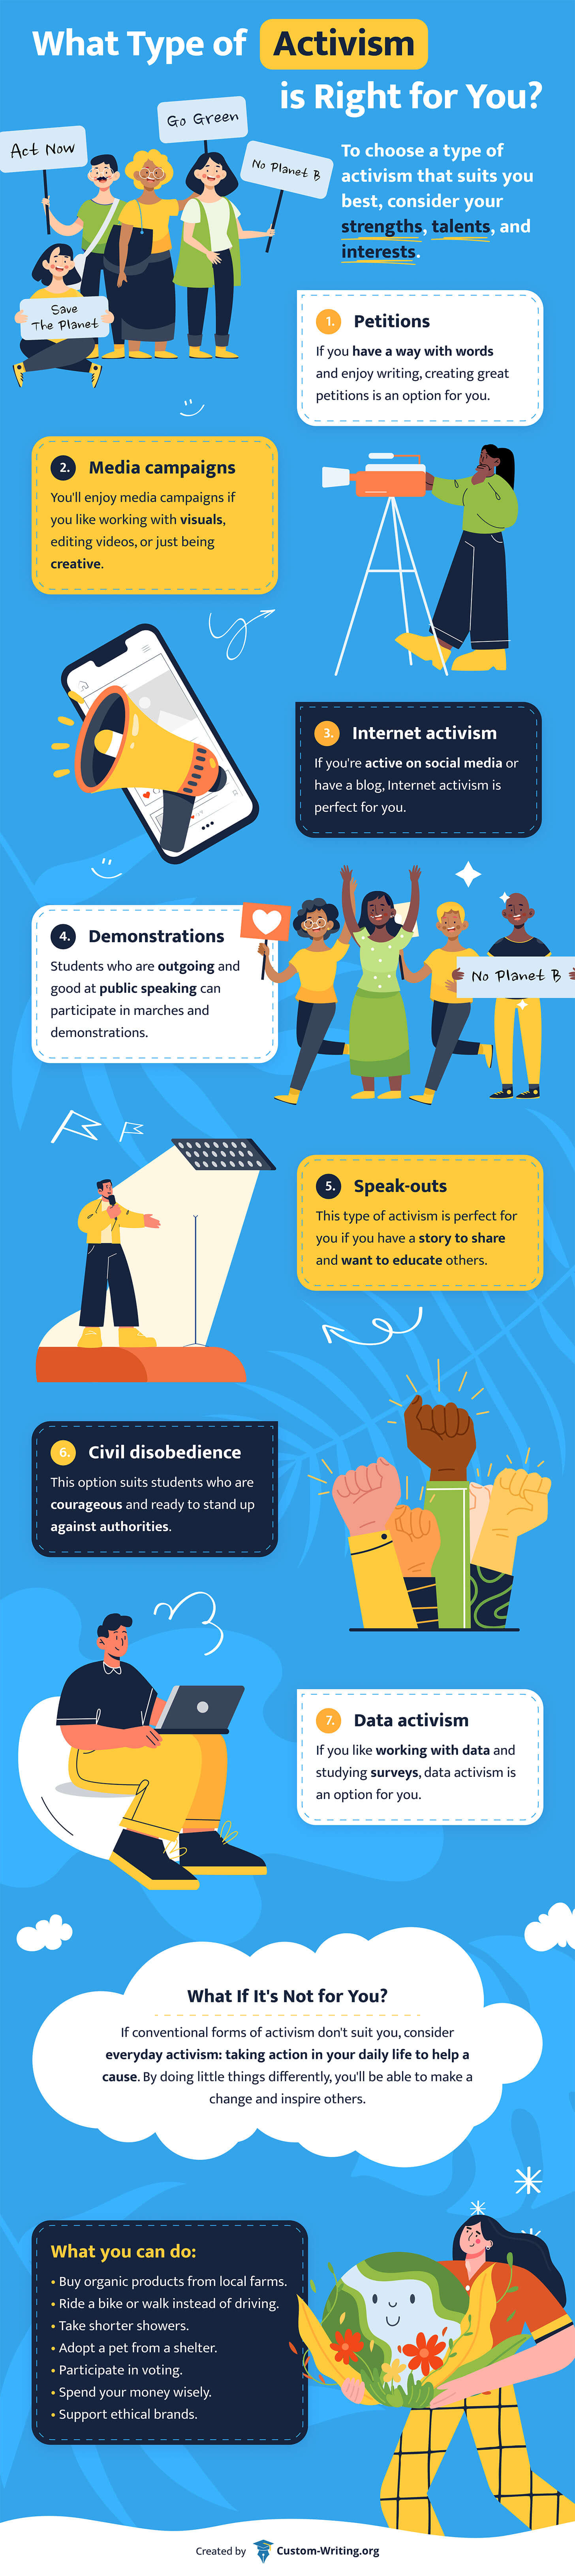 The infographic explains how to choose a type of activism that suits your personality.